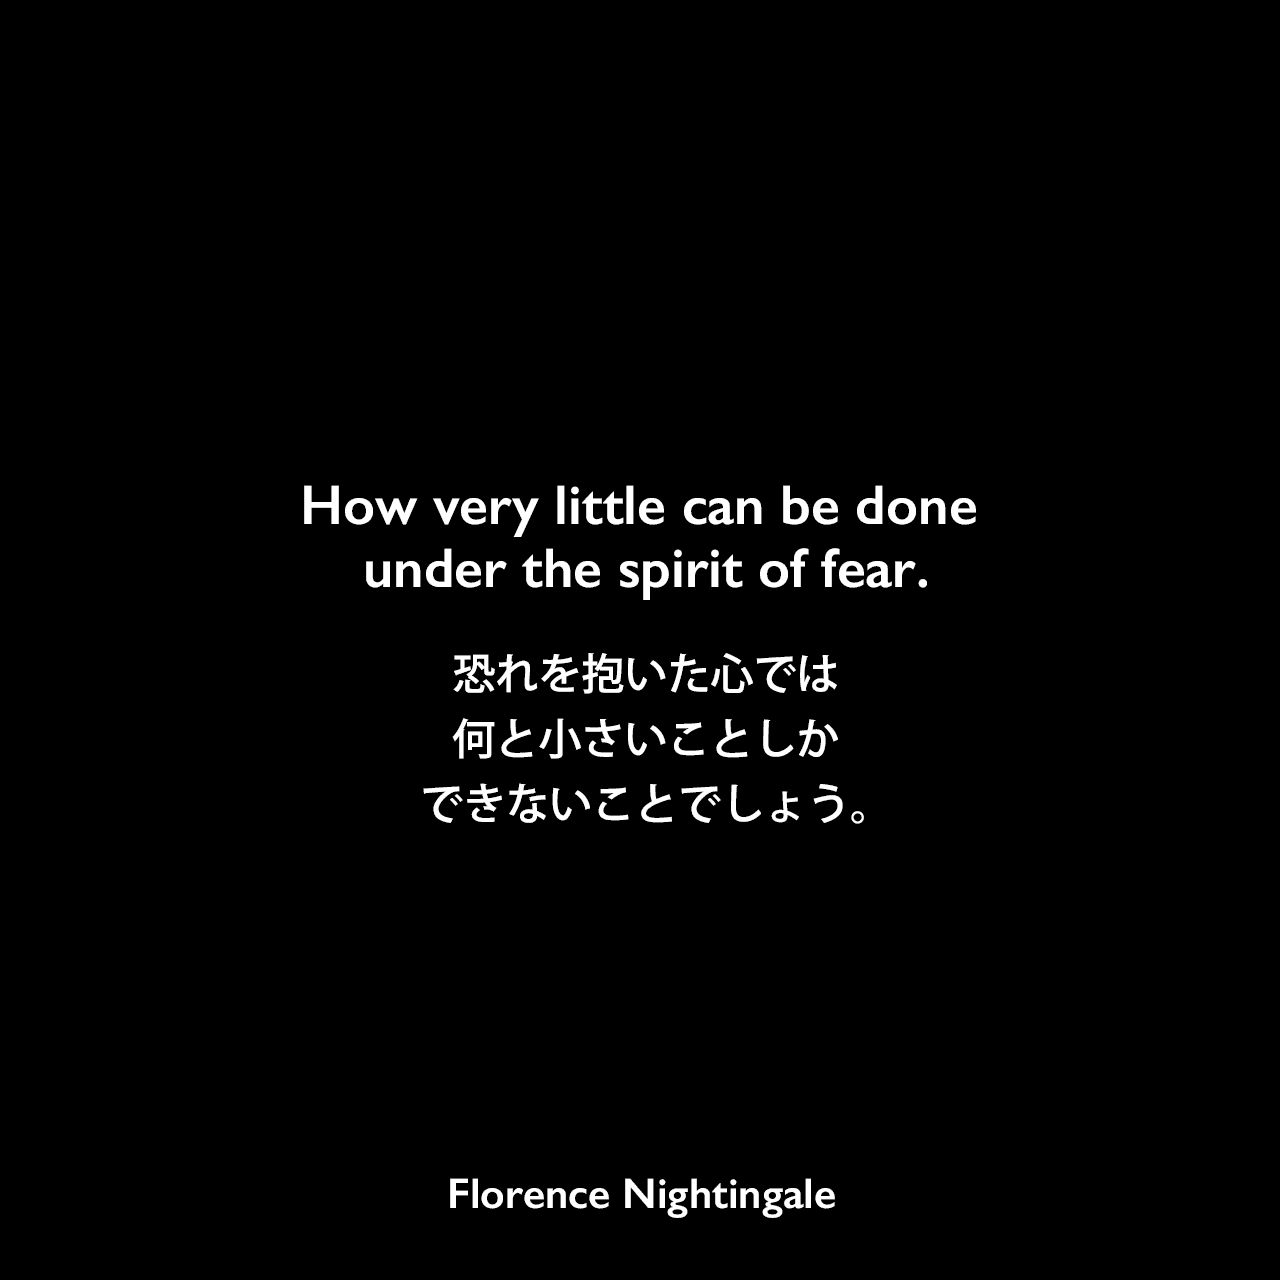 How very little can be done under the spirit of fear.恐れを抱いた心では、何と小さいことしかできないことでしょう。- John Cookの本「The Book of Positive Quotations 」よりFlorence Nightingale